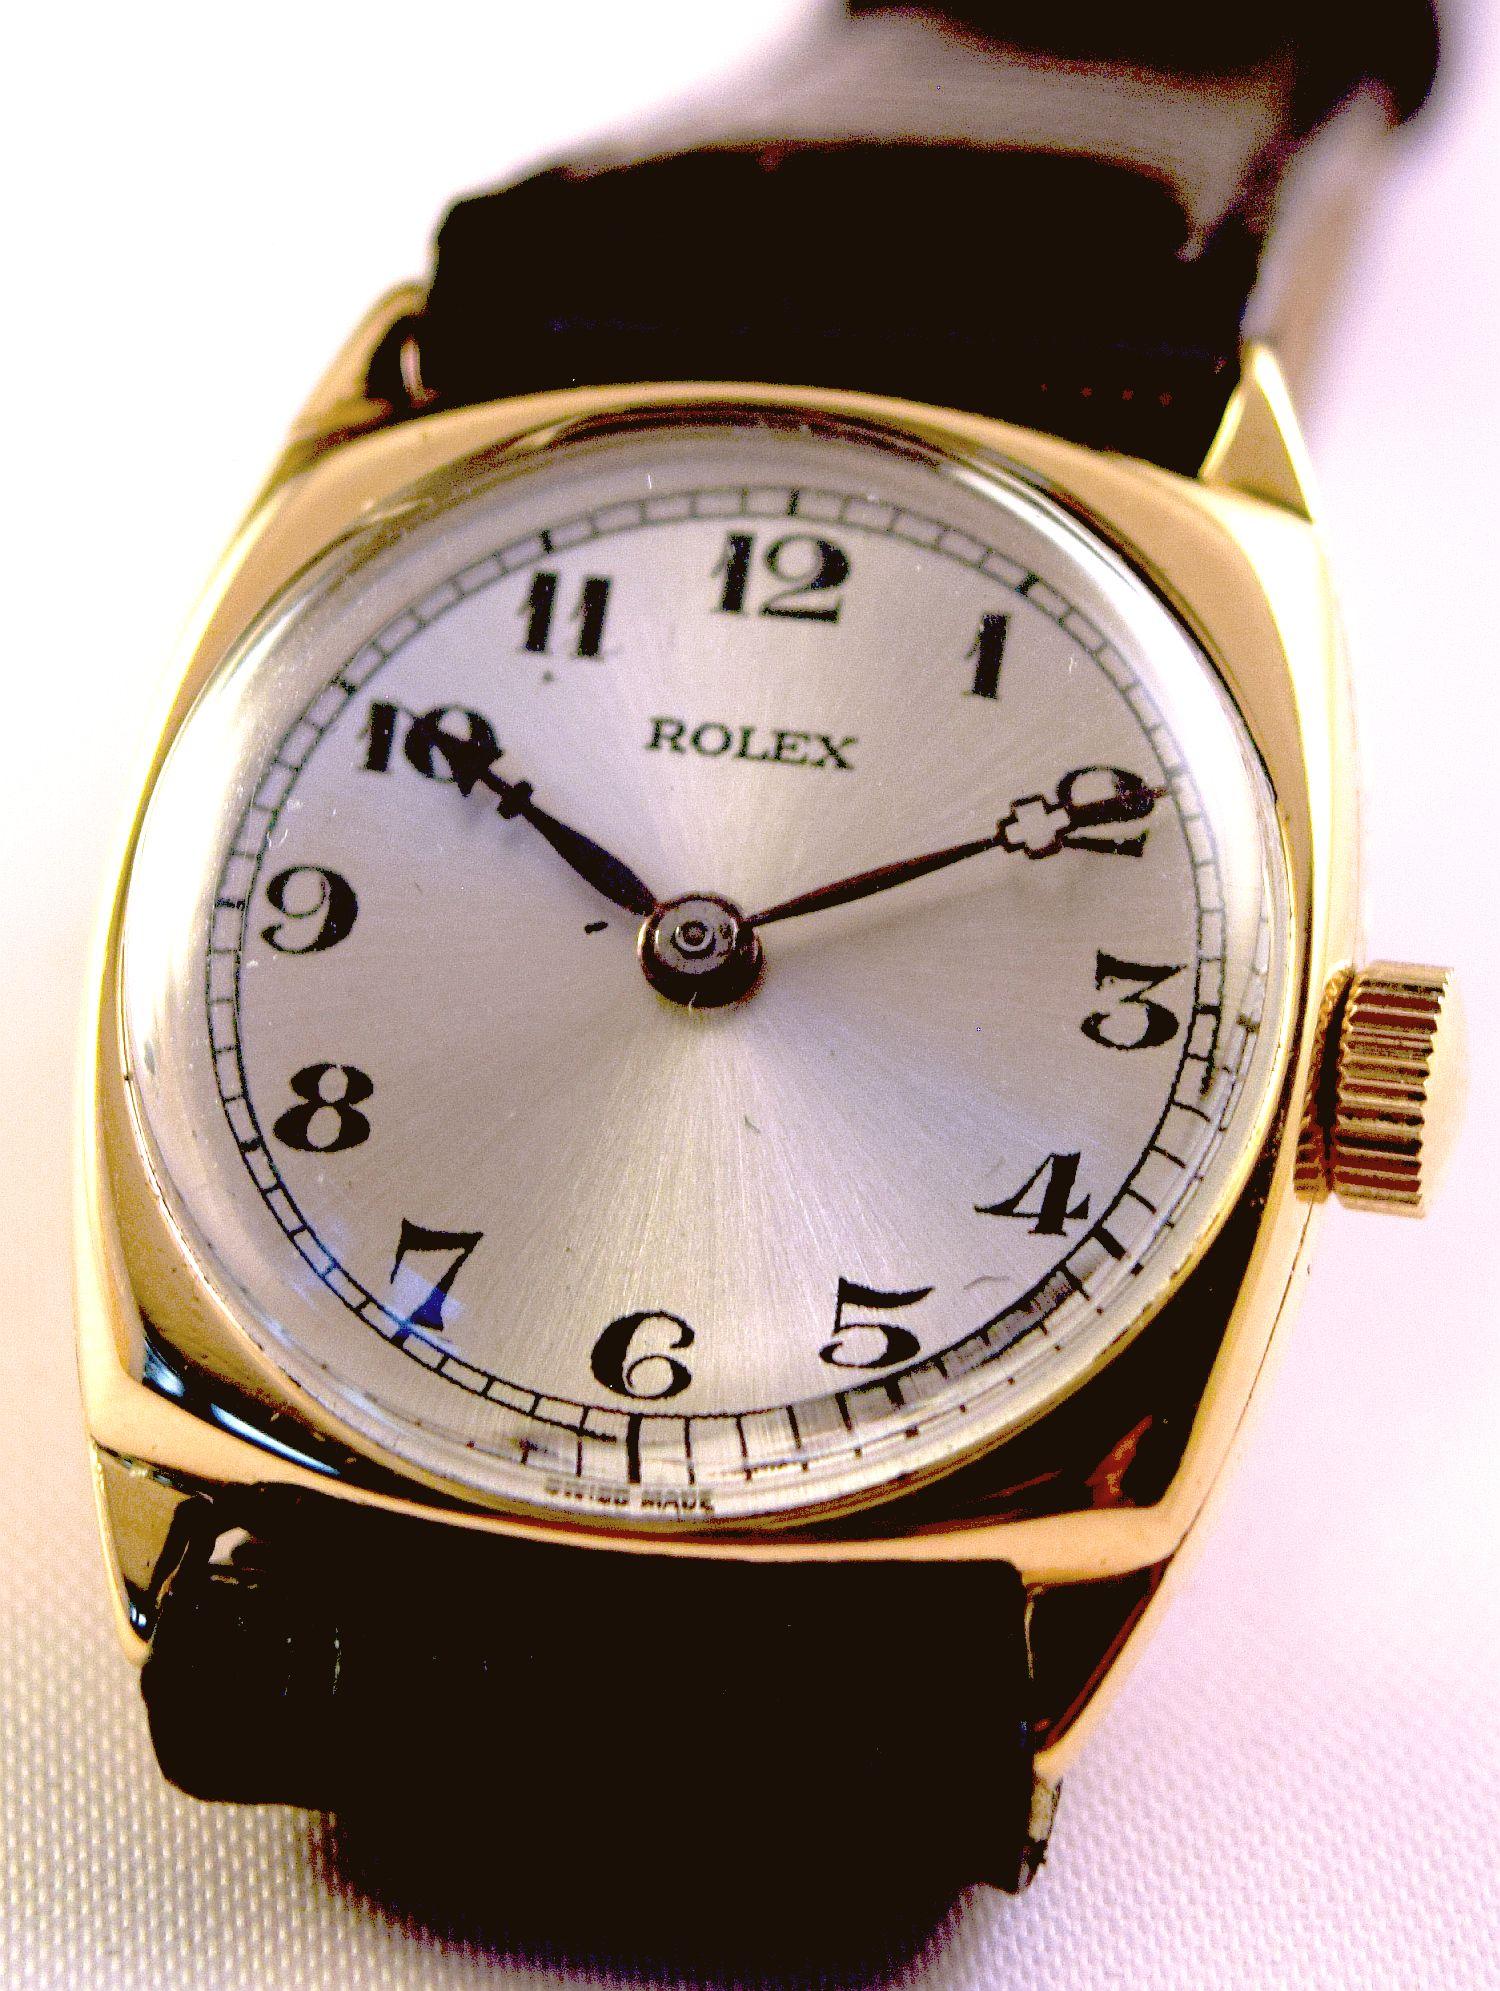 Rolex Vintage rare cushion shaped watch For Sale 8